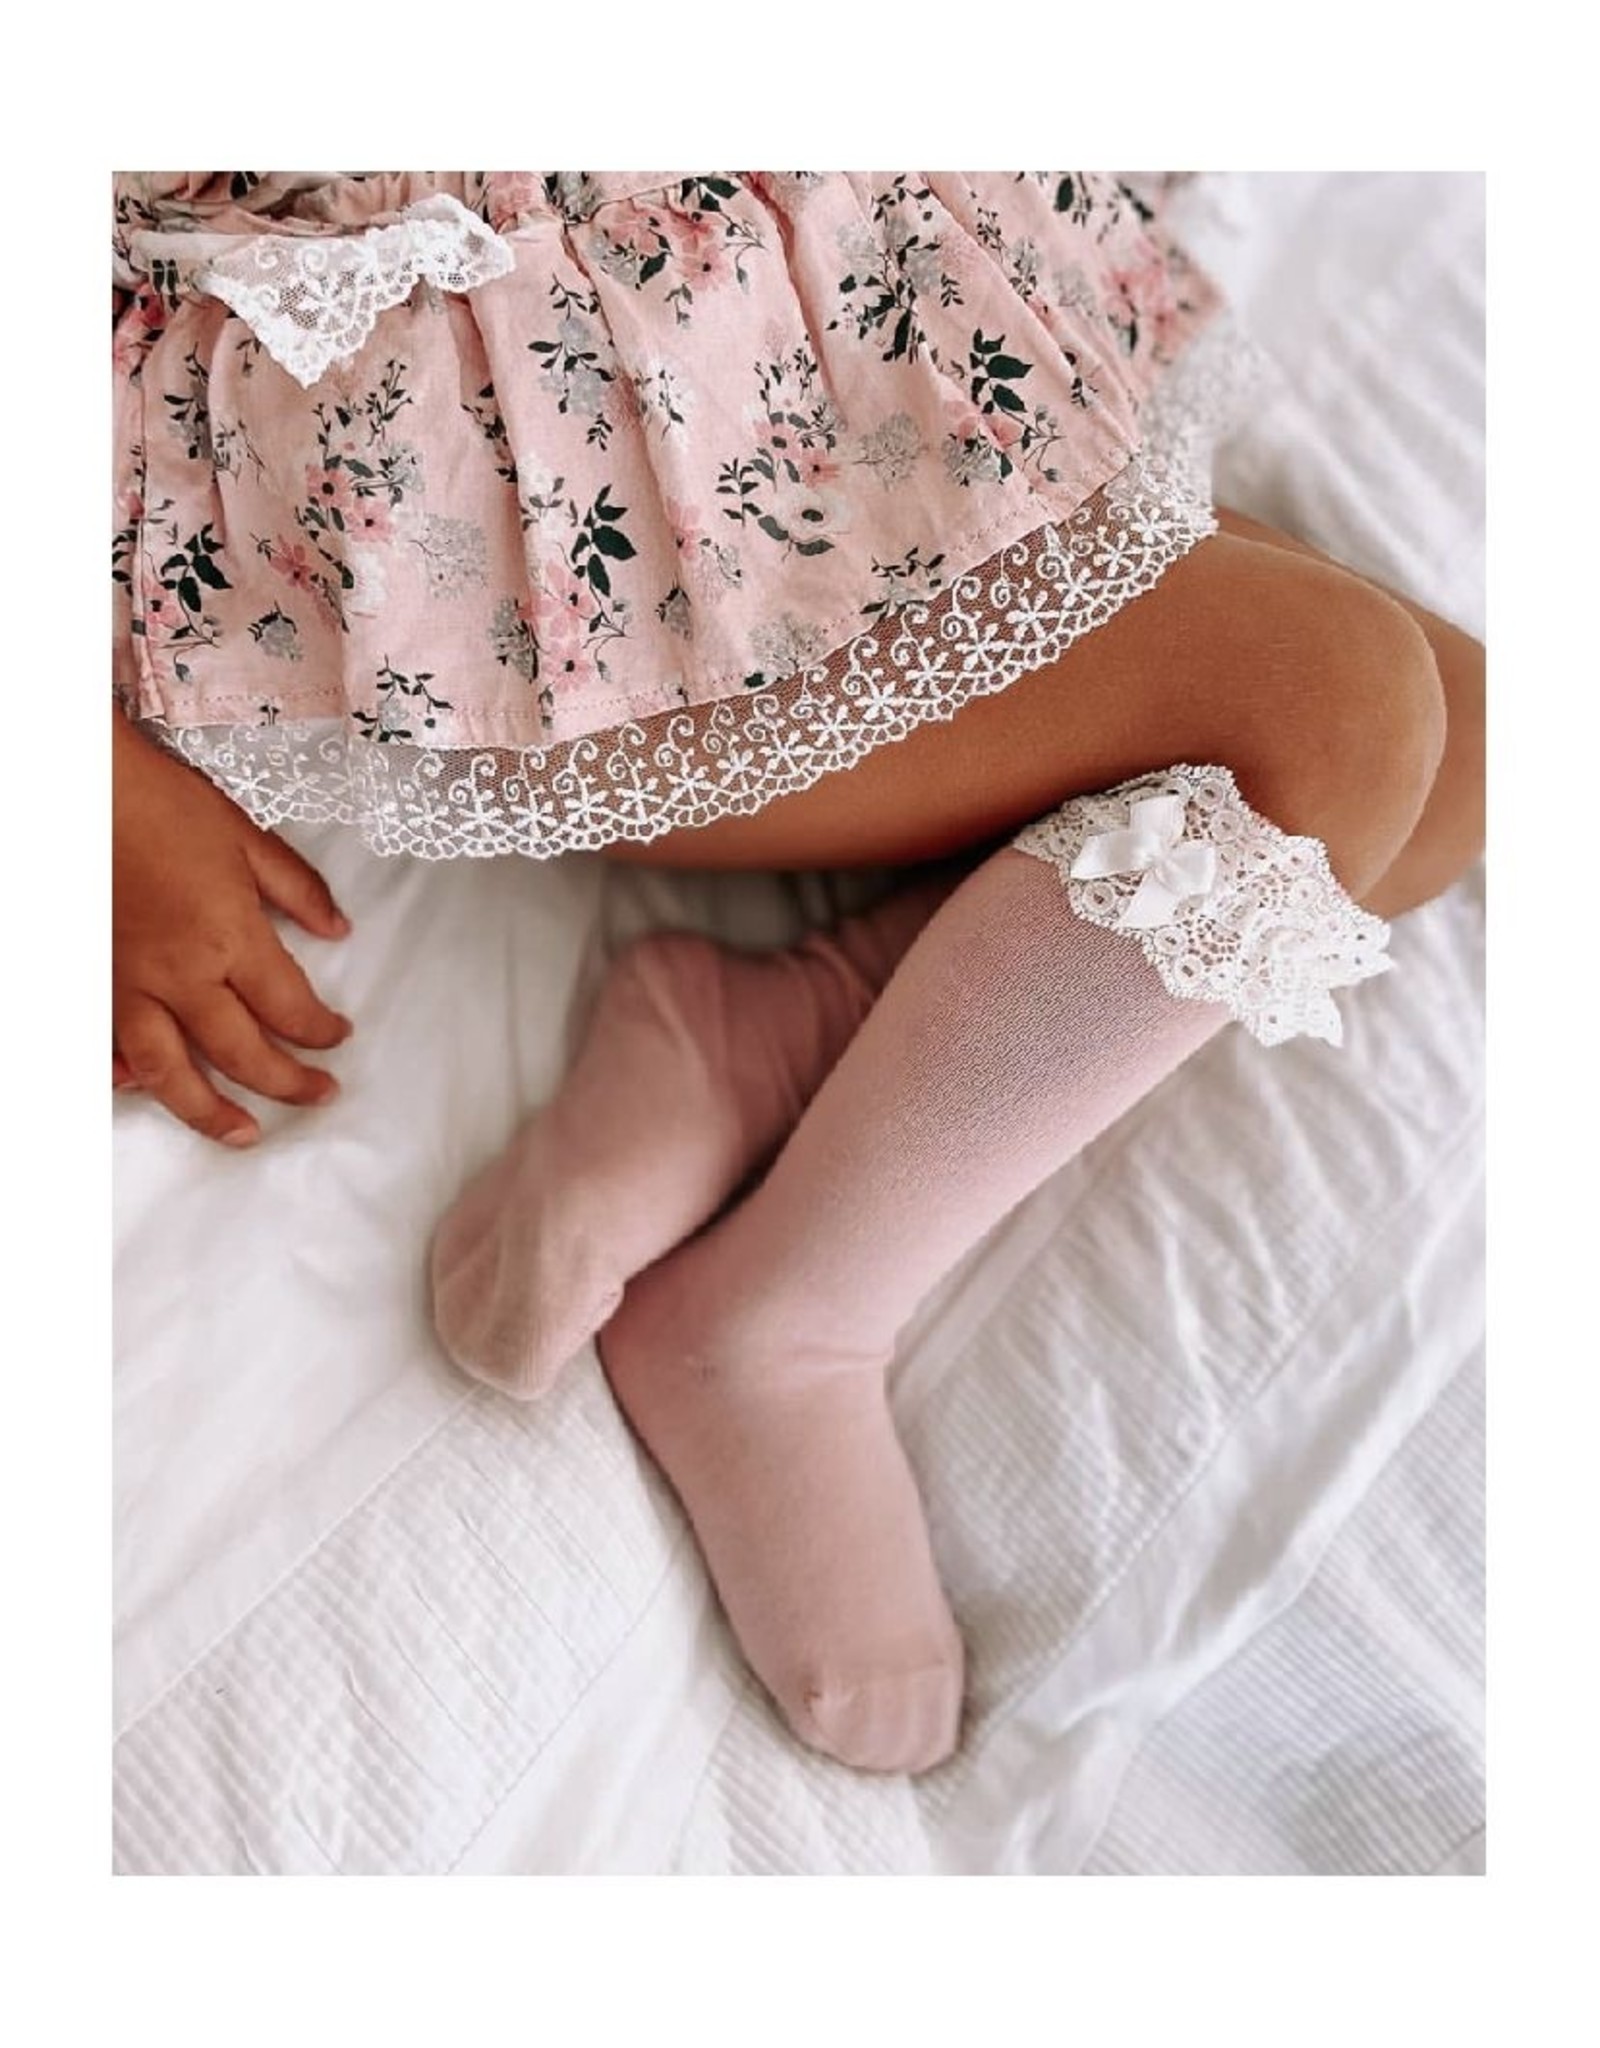 CONDOR Pale Pink Lace Trim Socks with Bow